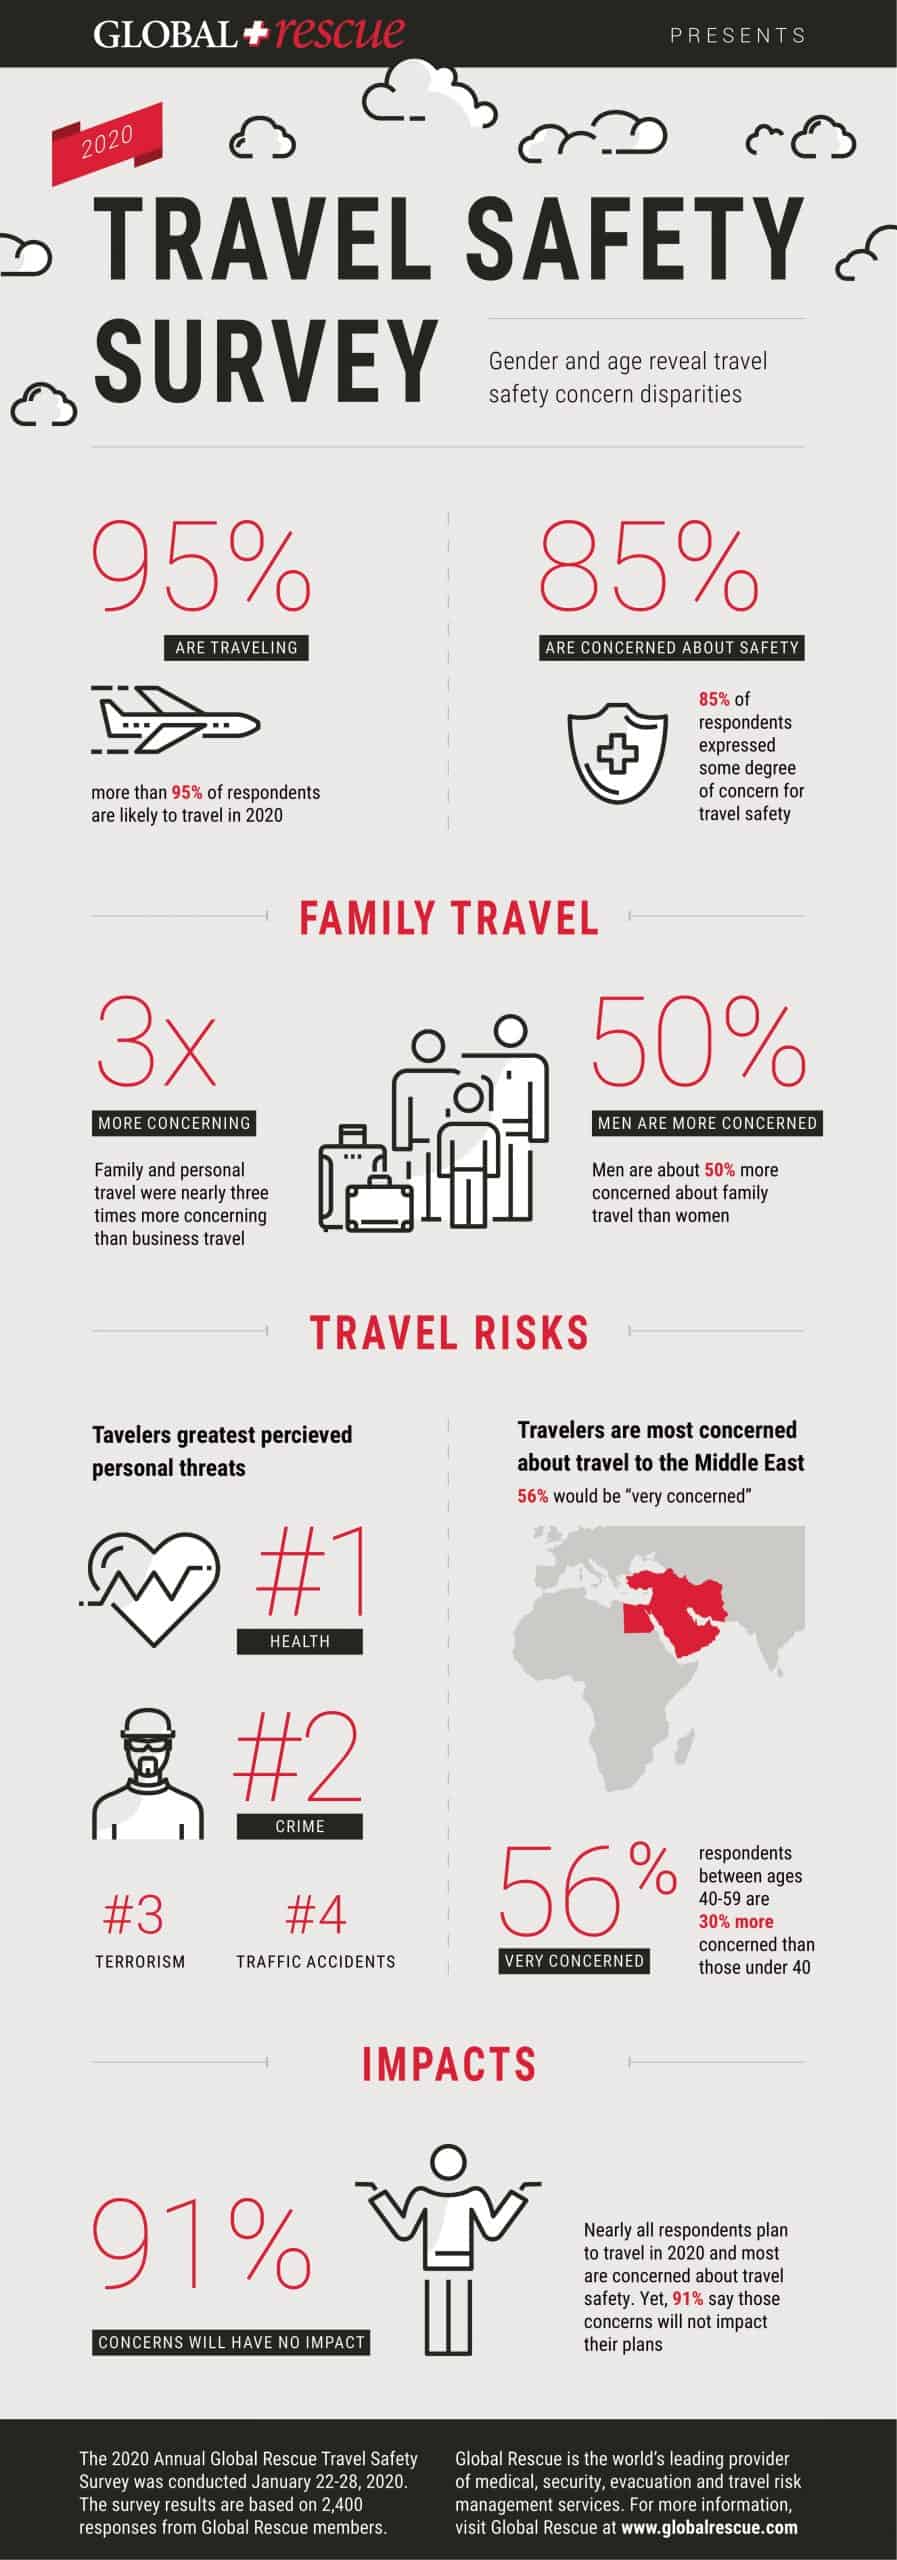 New Survey Reveals Travel Safety Concerns Differ Between Men and Women